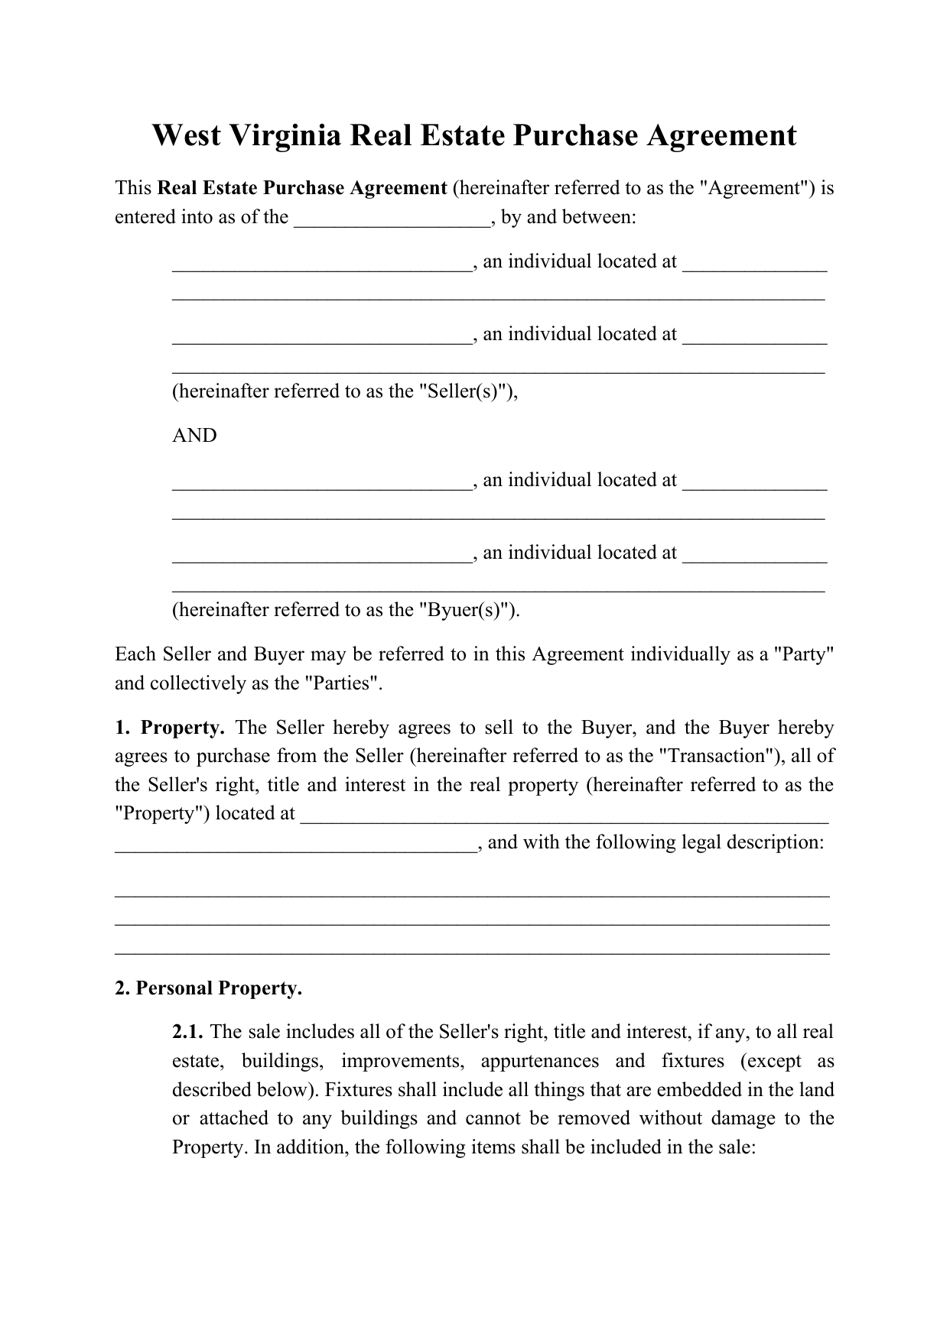 Real Estate Purchase Agreement Template - West Virginia, Page 1